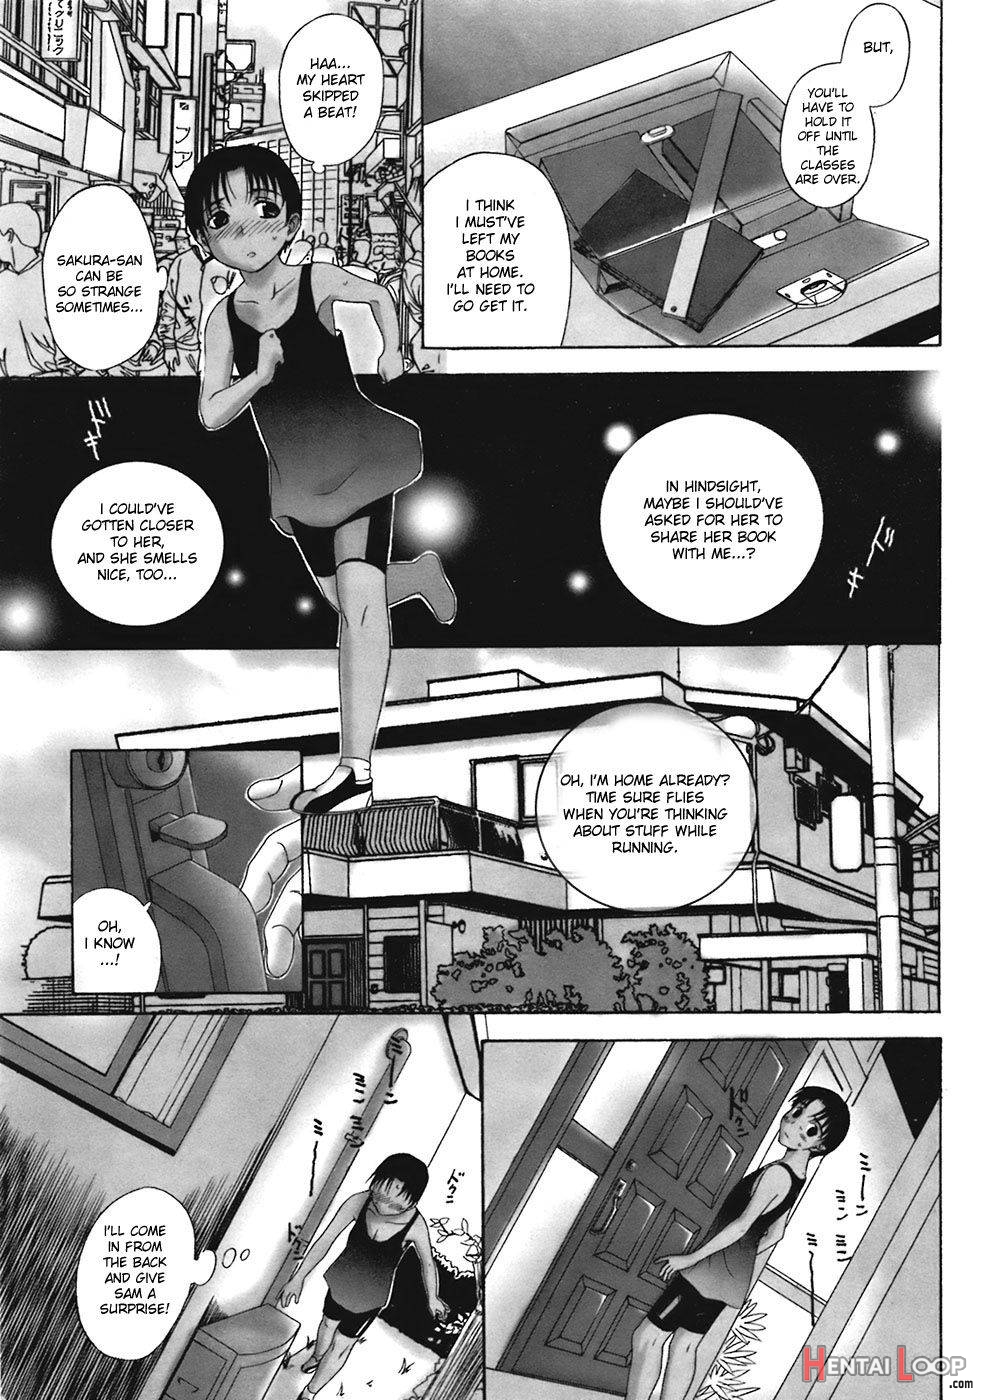 Homestay Ikkagetsume page 7